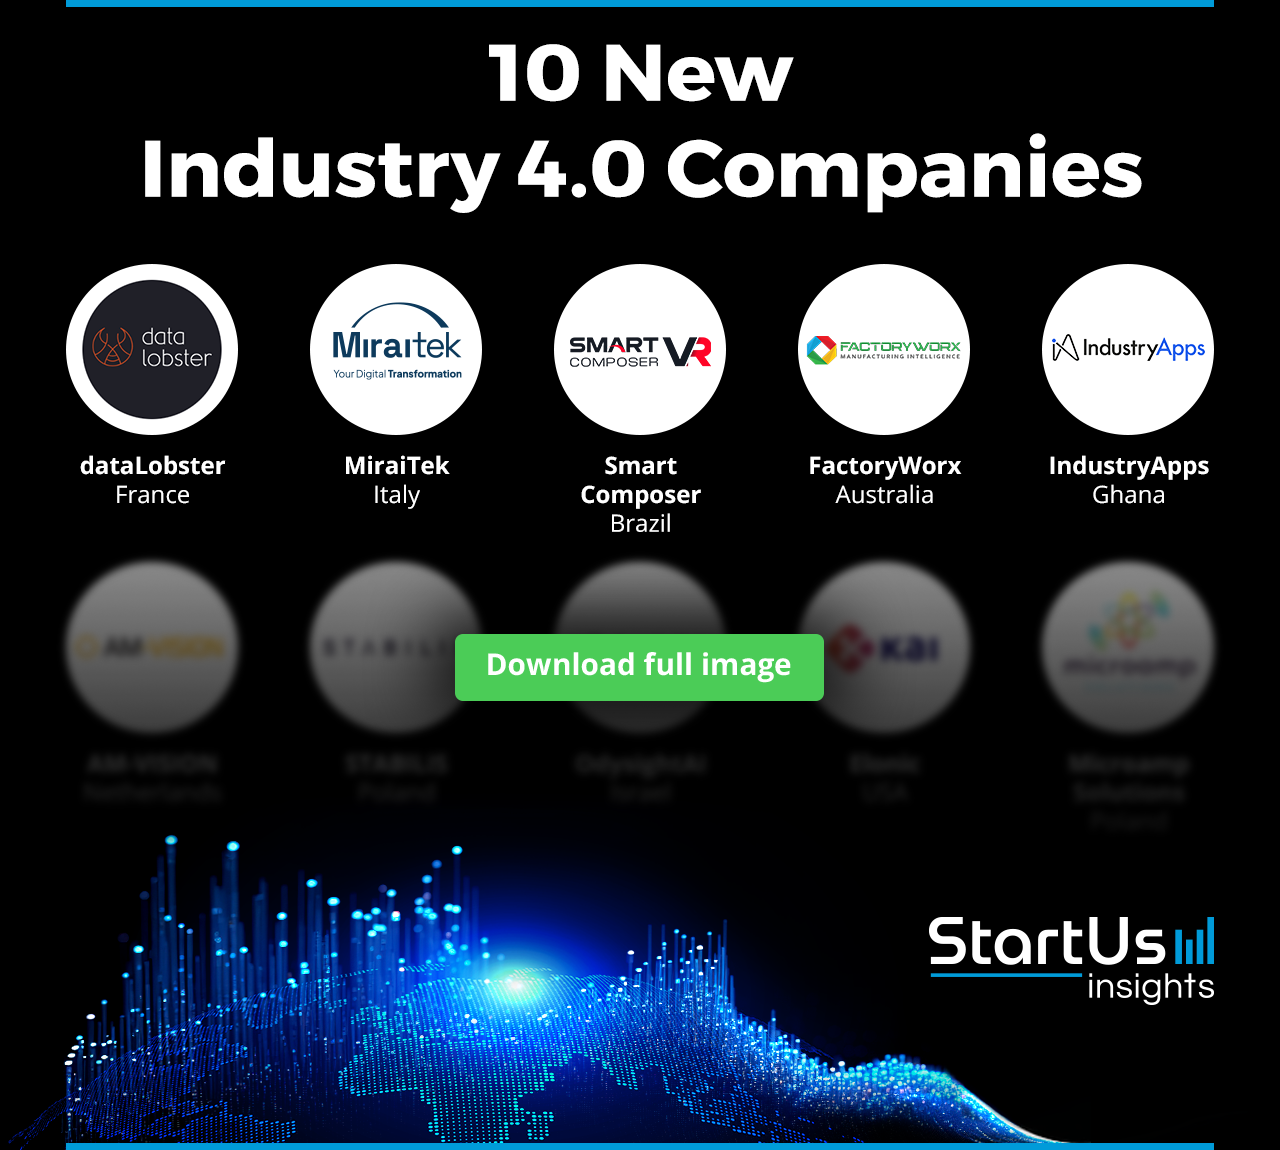 New-Industry-4.0-Companies-Logos-Blurred-StartUs-Insights-noresize